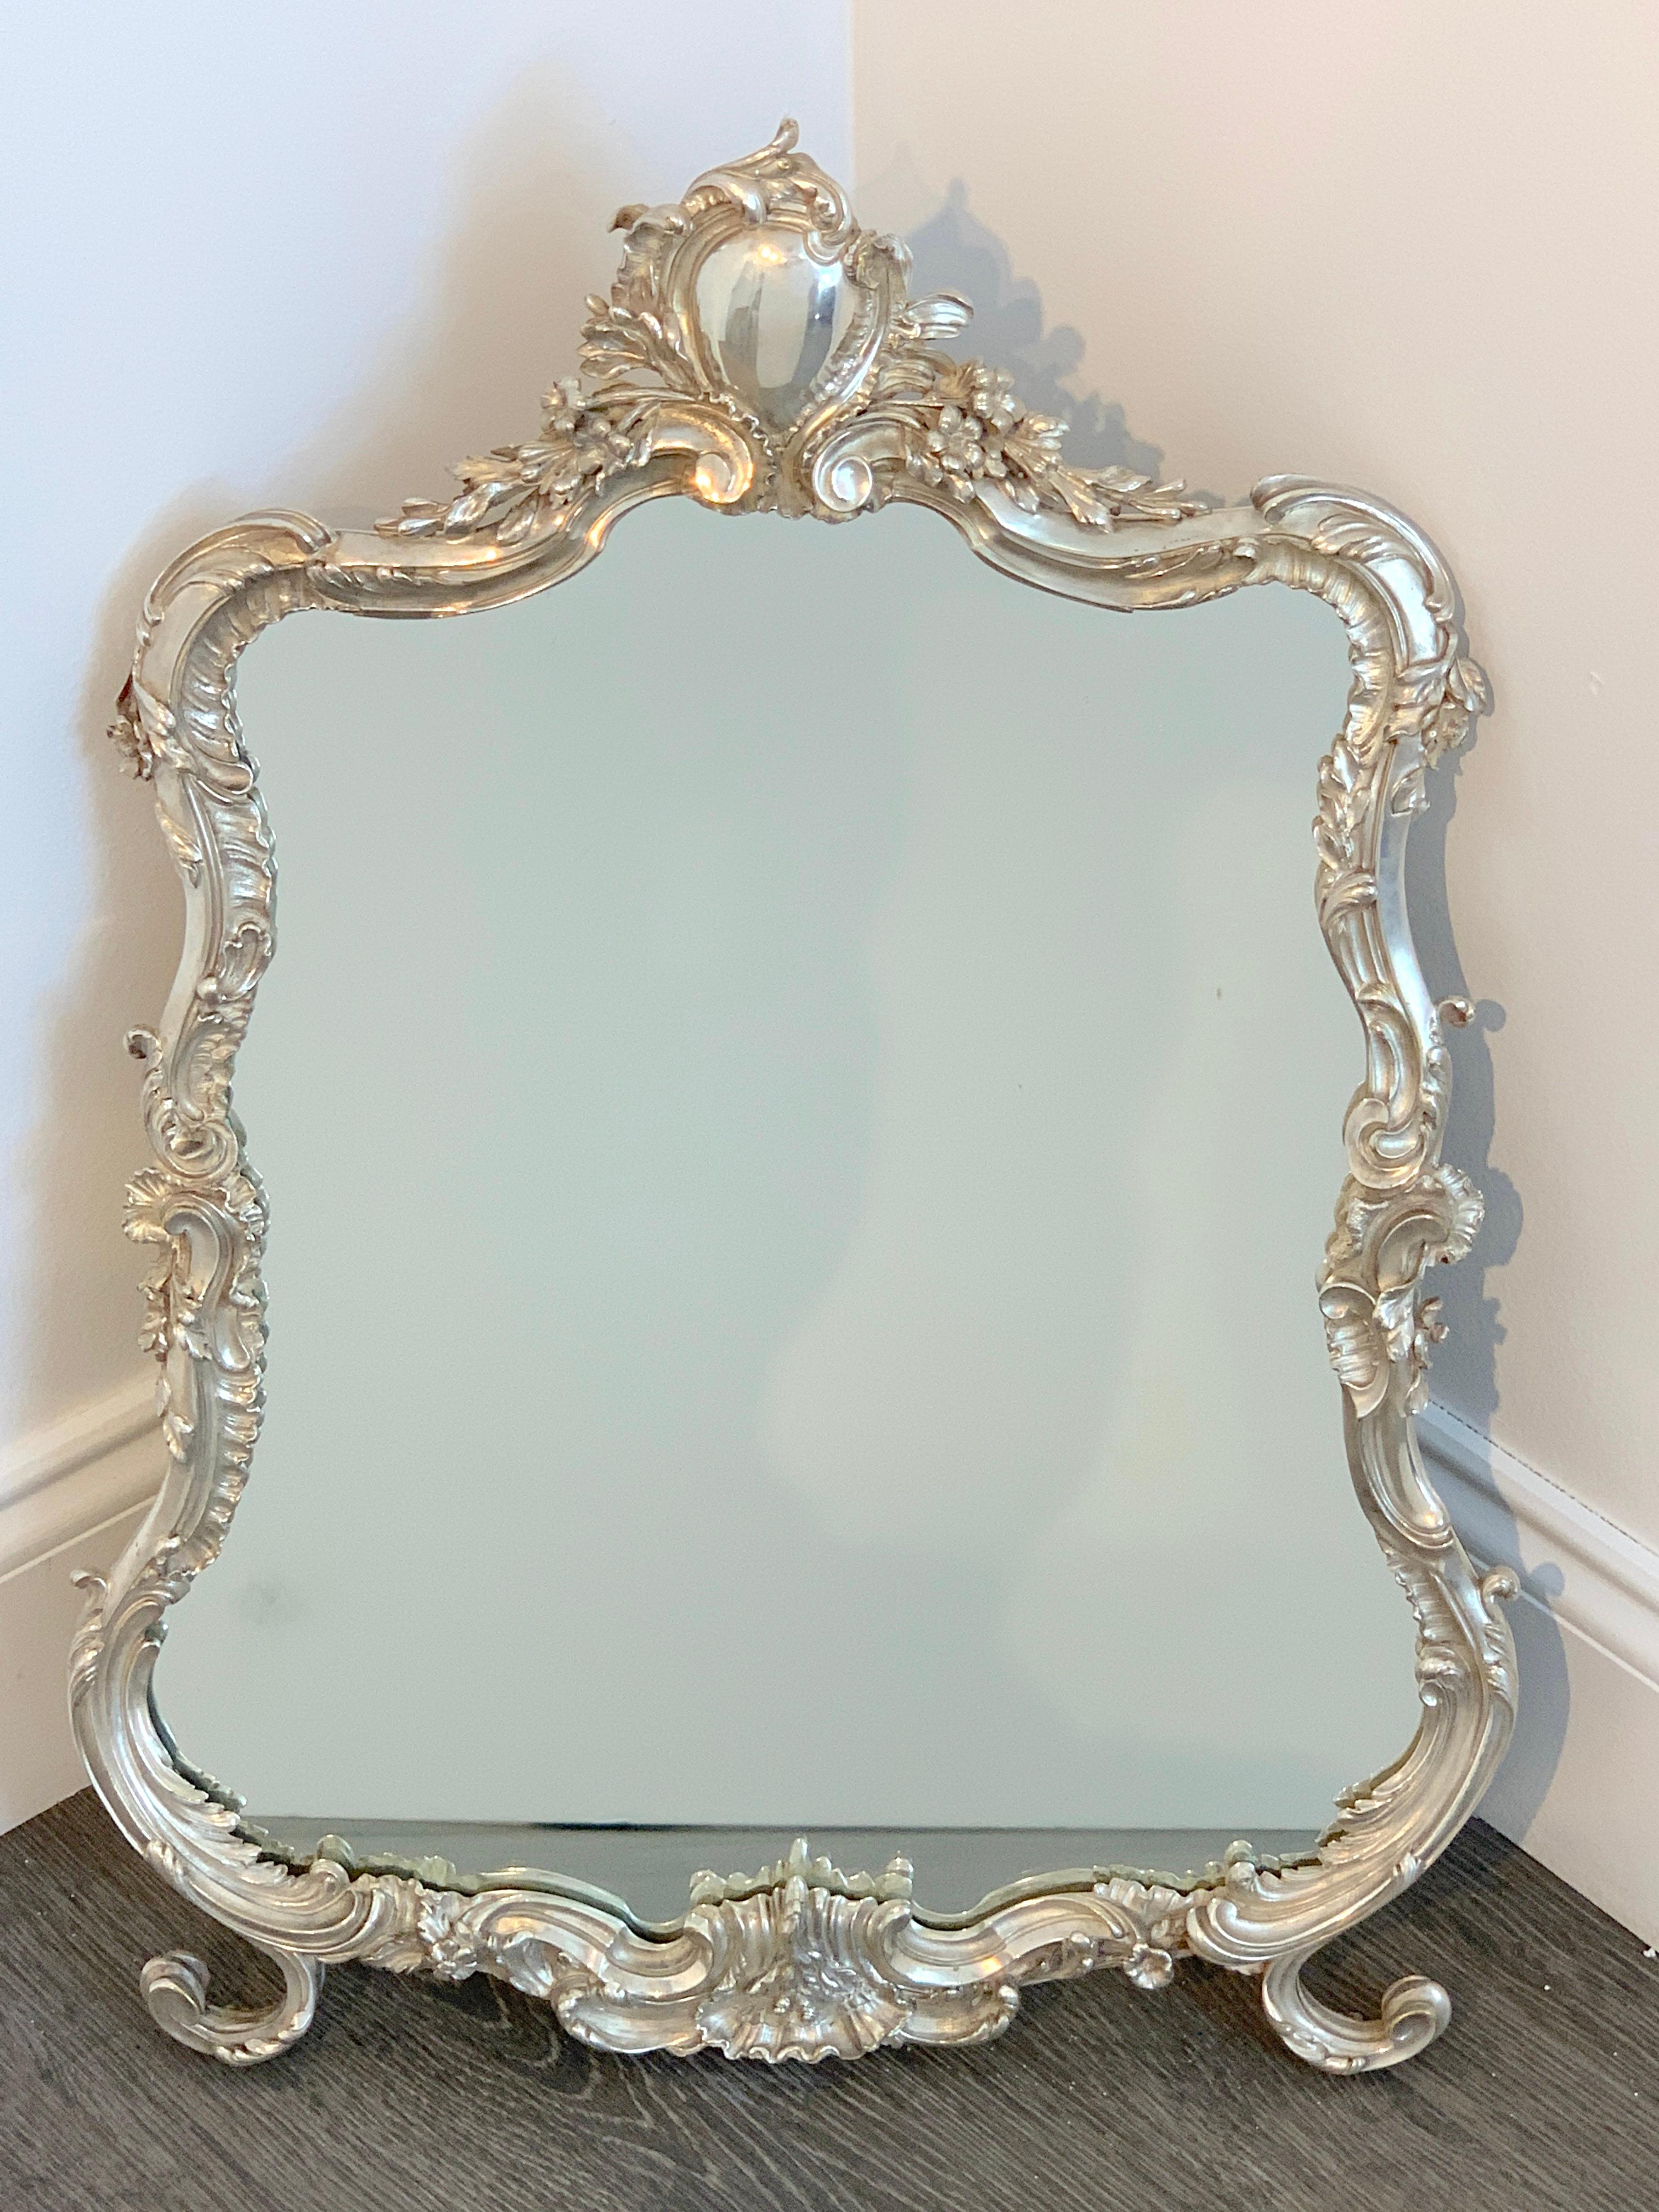 French silver plated dressing mirror, attributed to Christofle
Of cartouche shape with heavy, fine casting with chased florals, with new inset clear mirror, raised scroll feet. Unmarked.